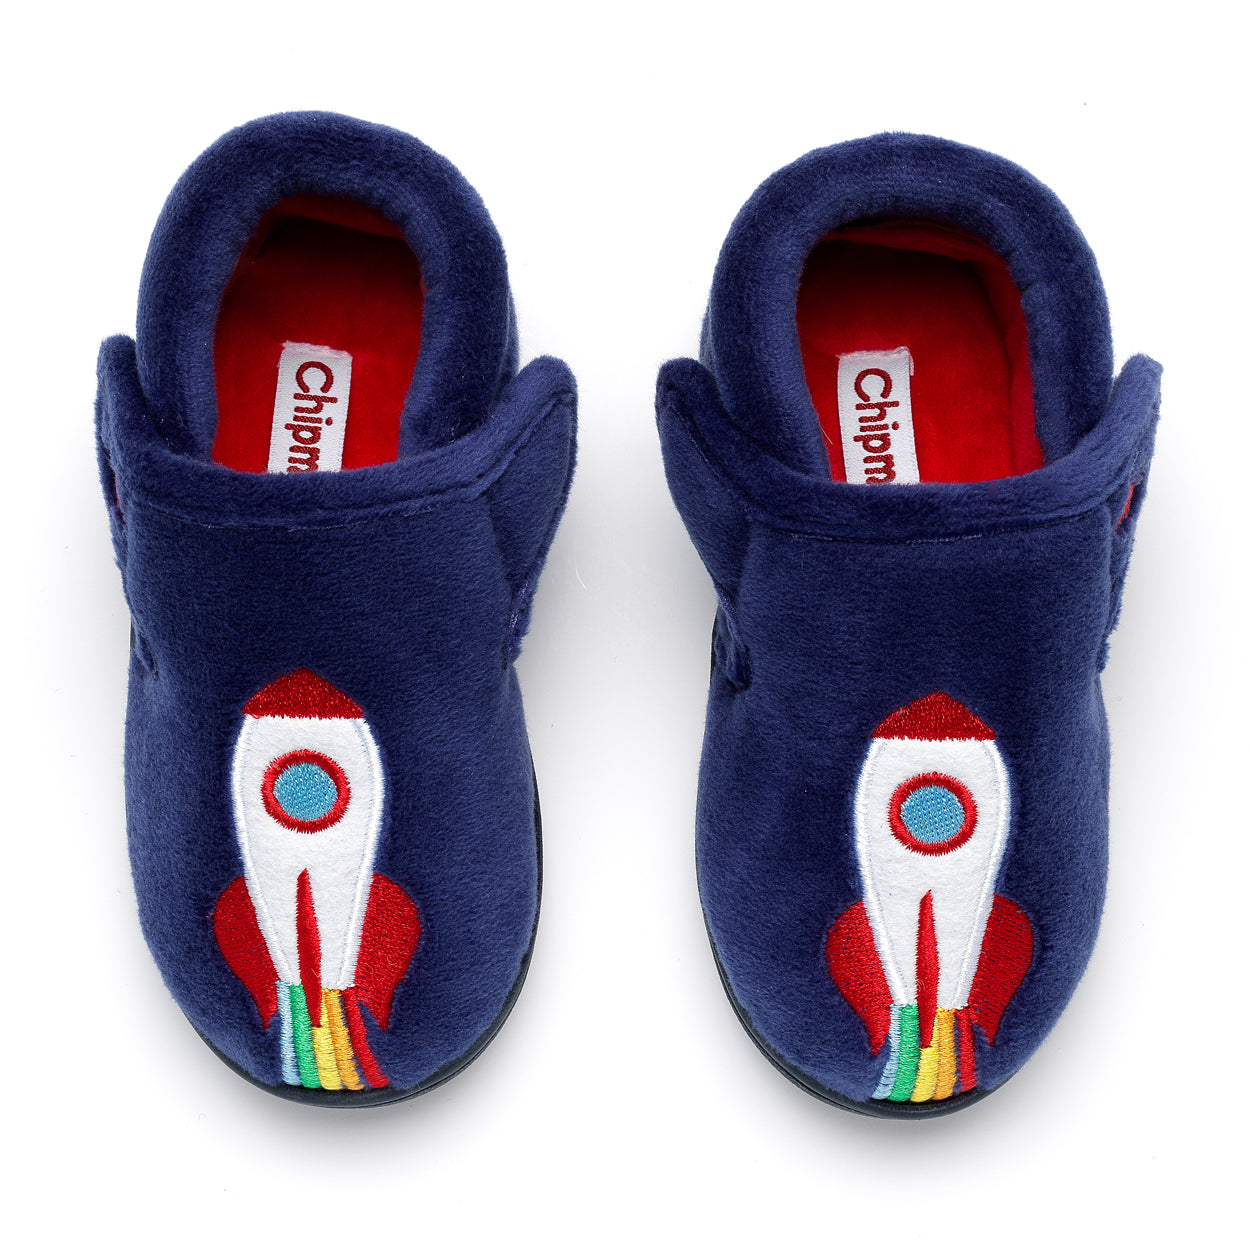 A pair of boys slippers by Chipmunks, style Blast, in navy multi with rocket design and velcro fastening. View from above.